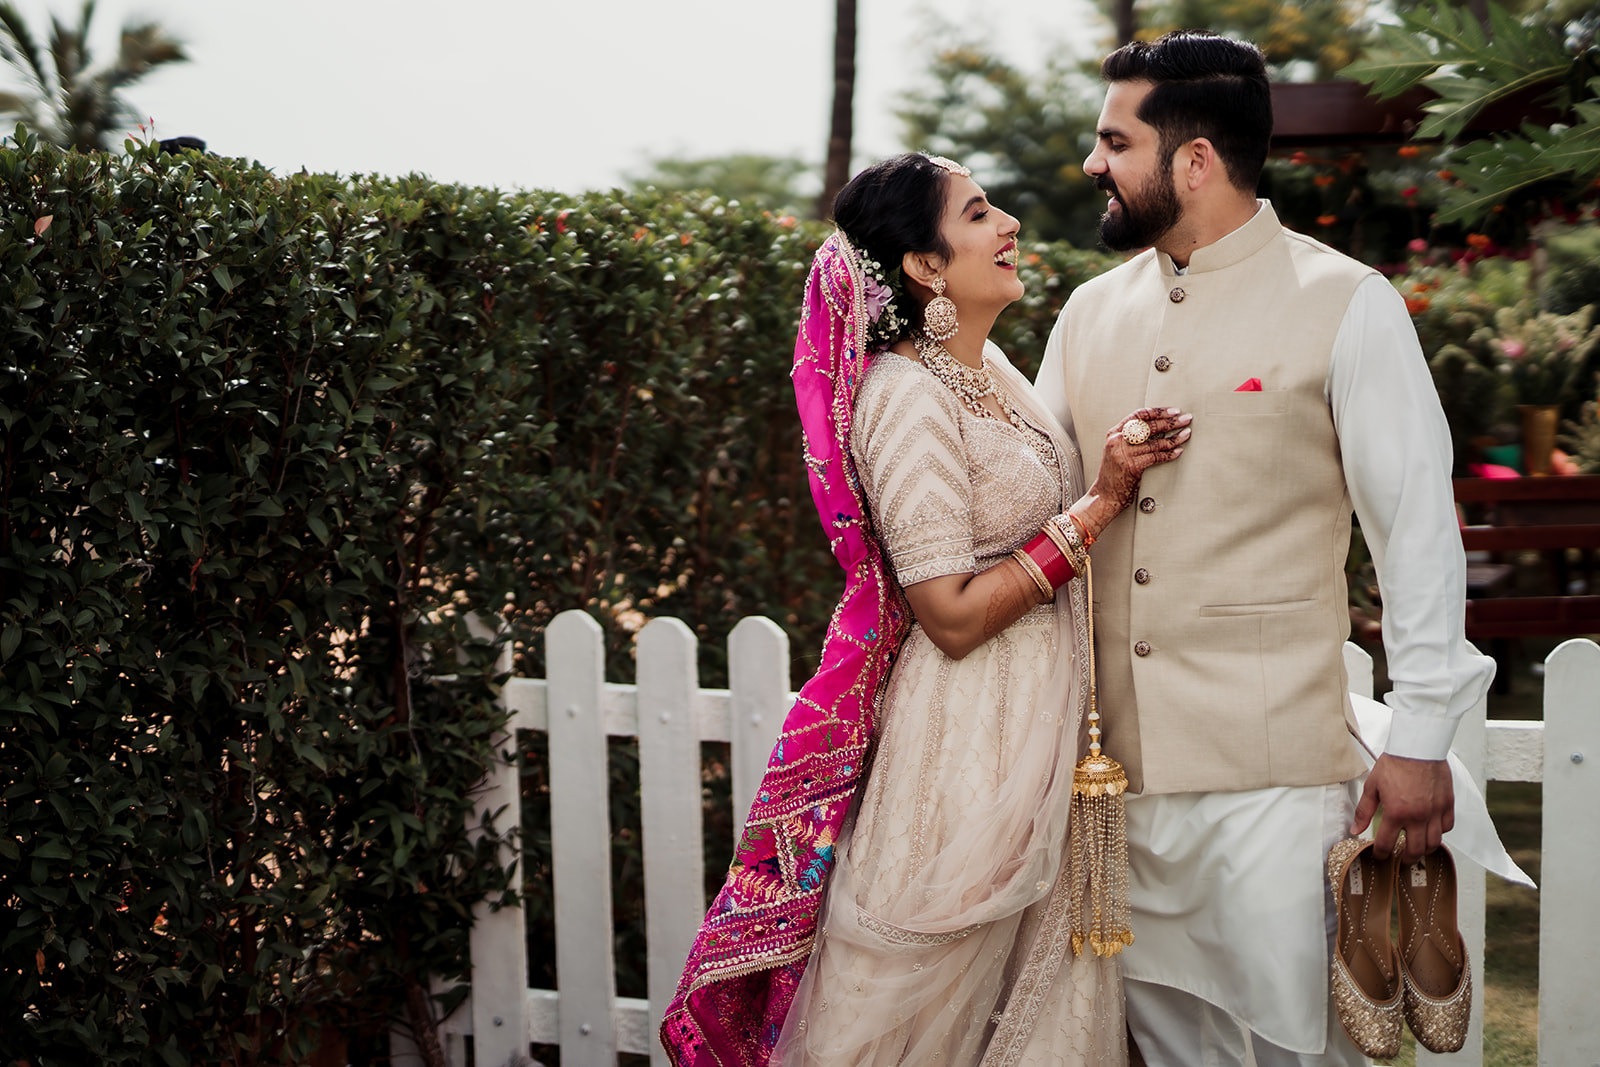 Wedding elegance: The bride and groom exude timeless charm in their beautifully coordinated wedding attire